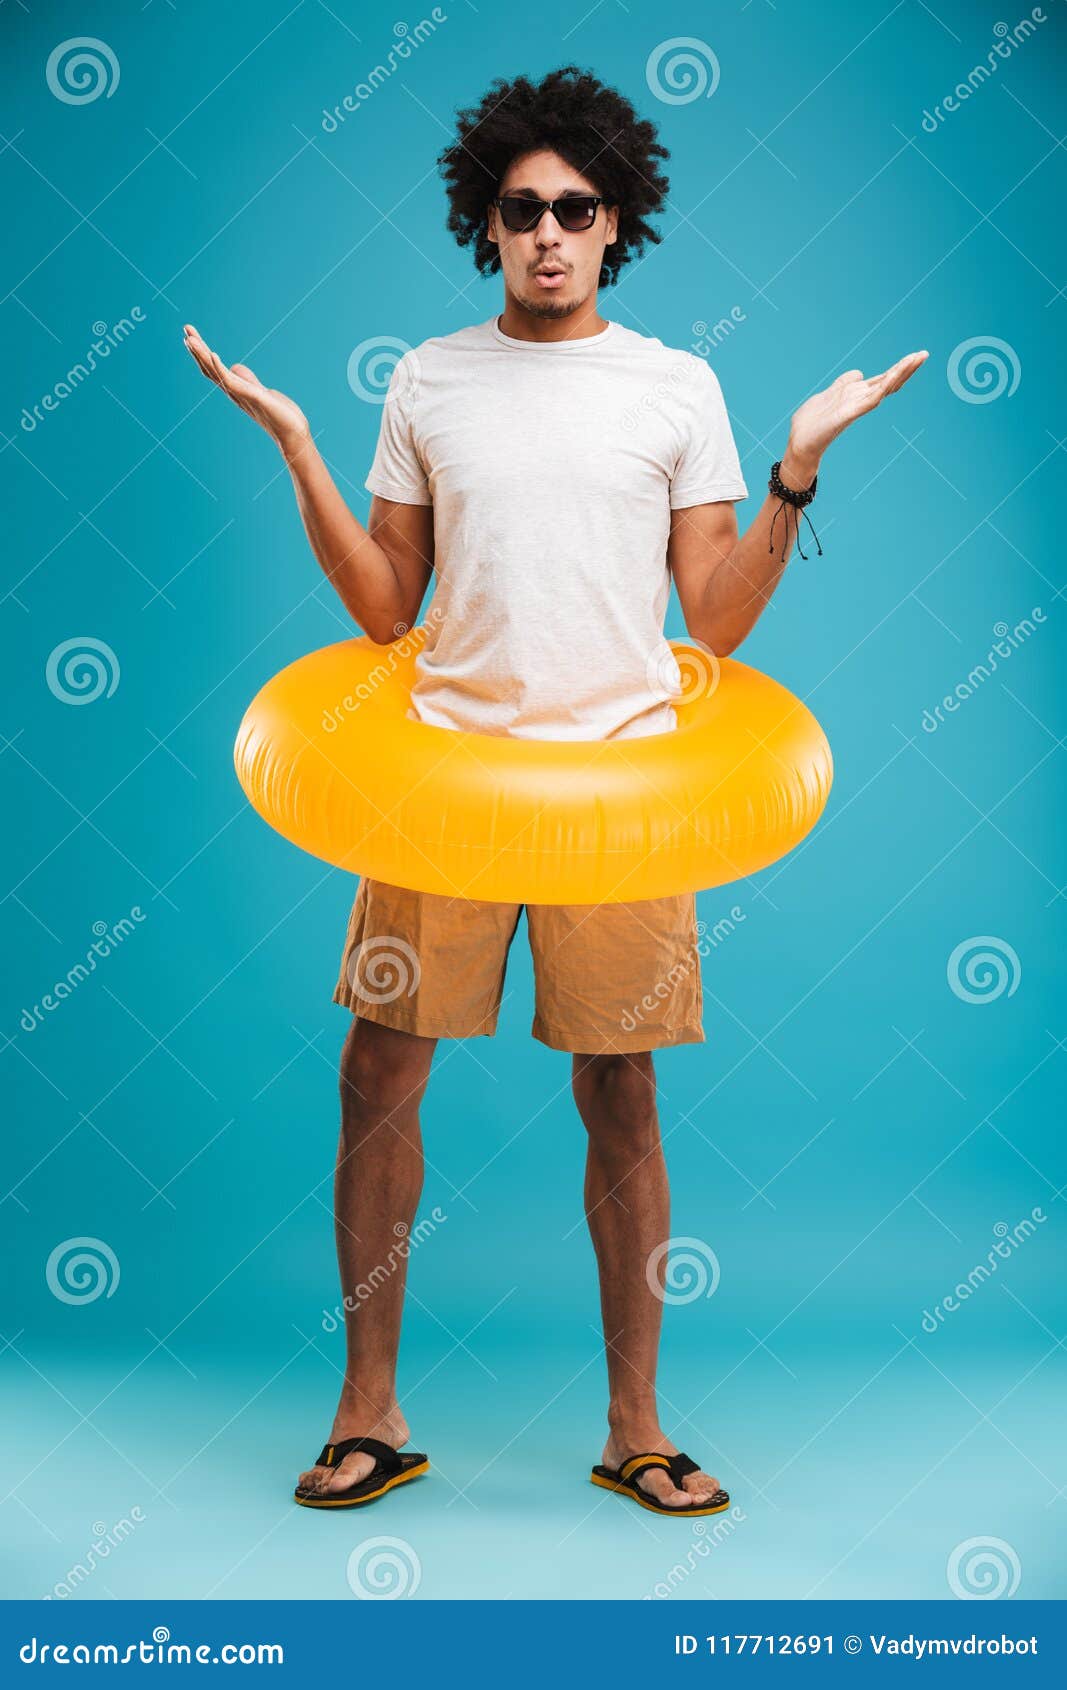 Shocked Young African Curly Man Holding Rubber Ring. Stock Image ...